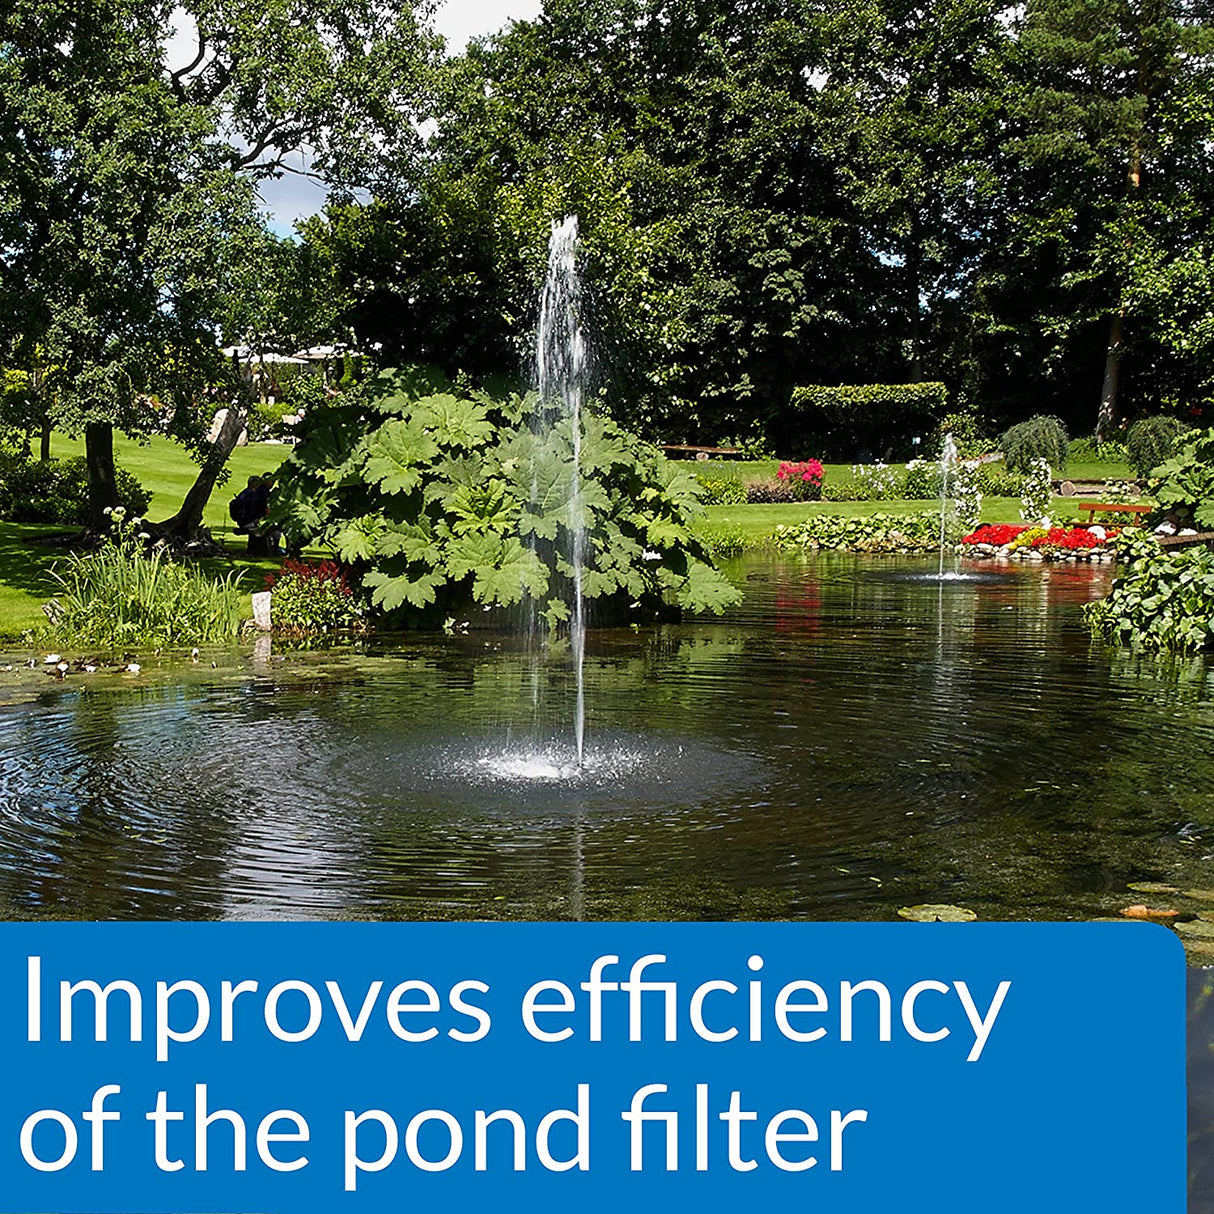 API Pond Accu-Clear Quickly Clears Pond Water - PetMountain.com